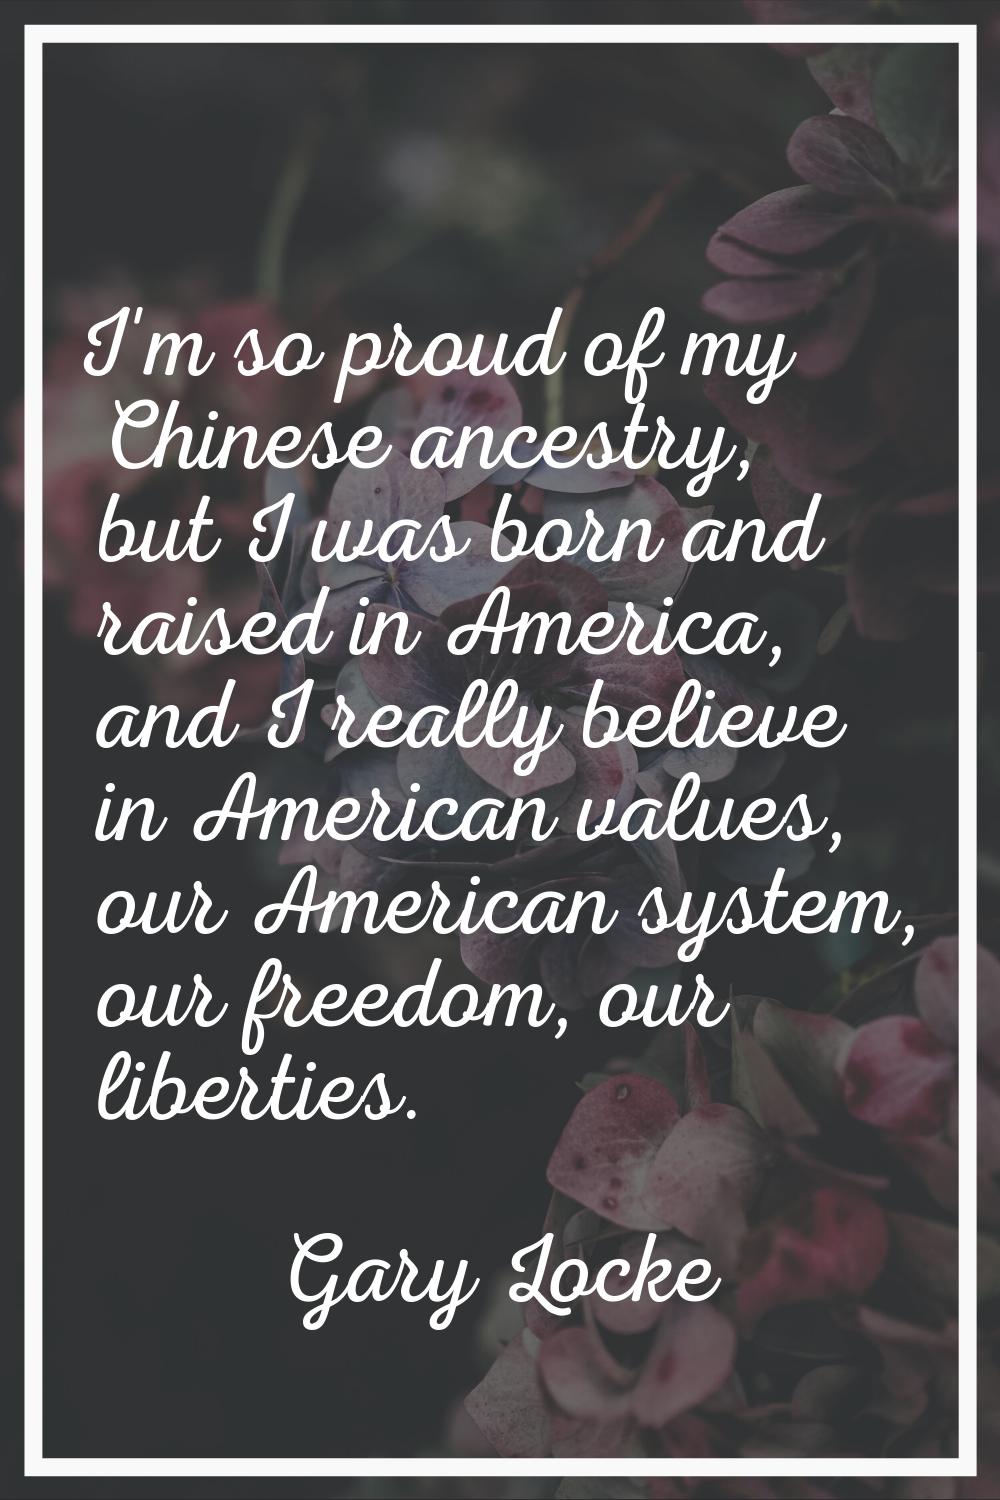 I'm so proud of my Chinese ancestry, but I was born and raised in America, and I really believe in 